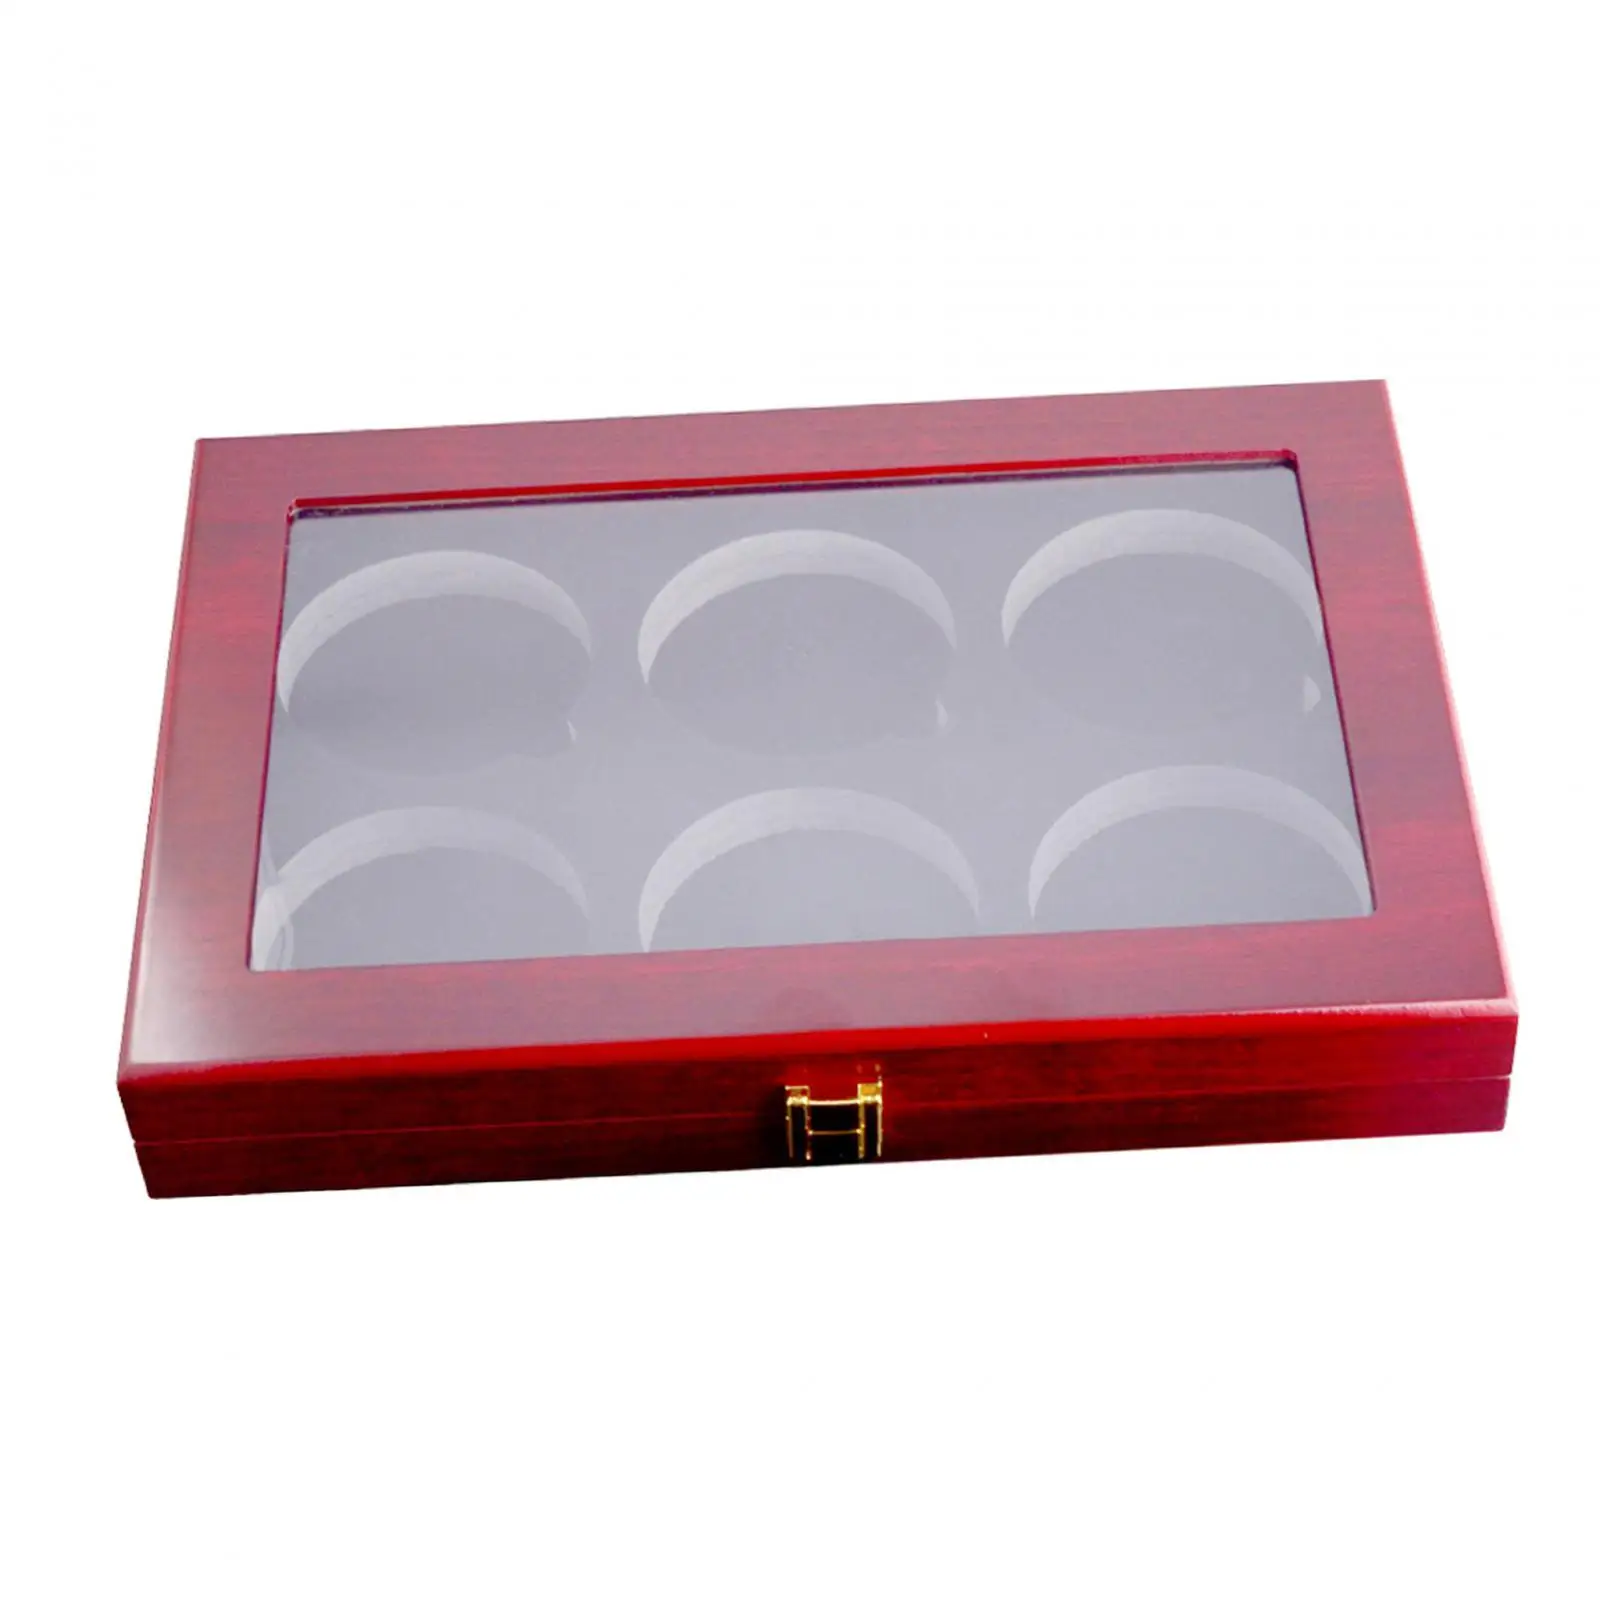 Hockey Puck Display Case Wood Dustproof Easy to Use with Protection Door Lockable Storage Cabinet Hockey Puck Case Puck Holder